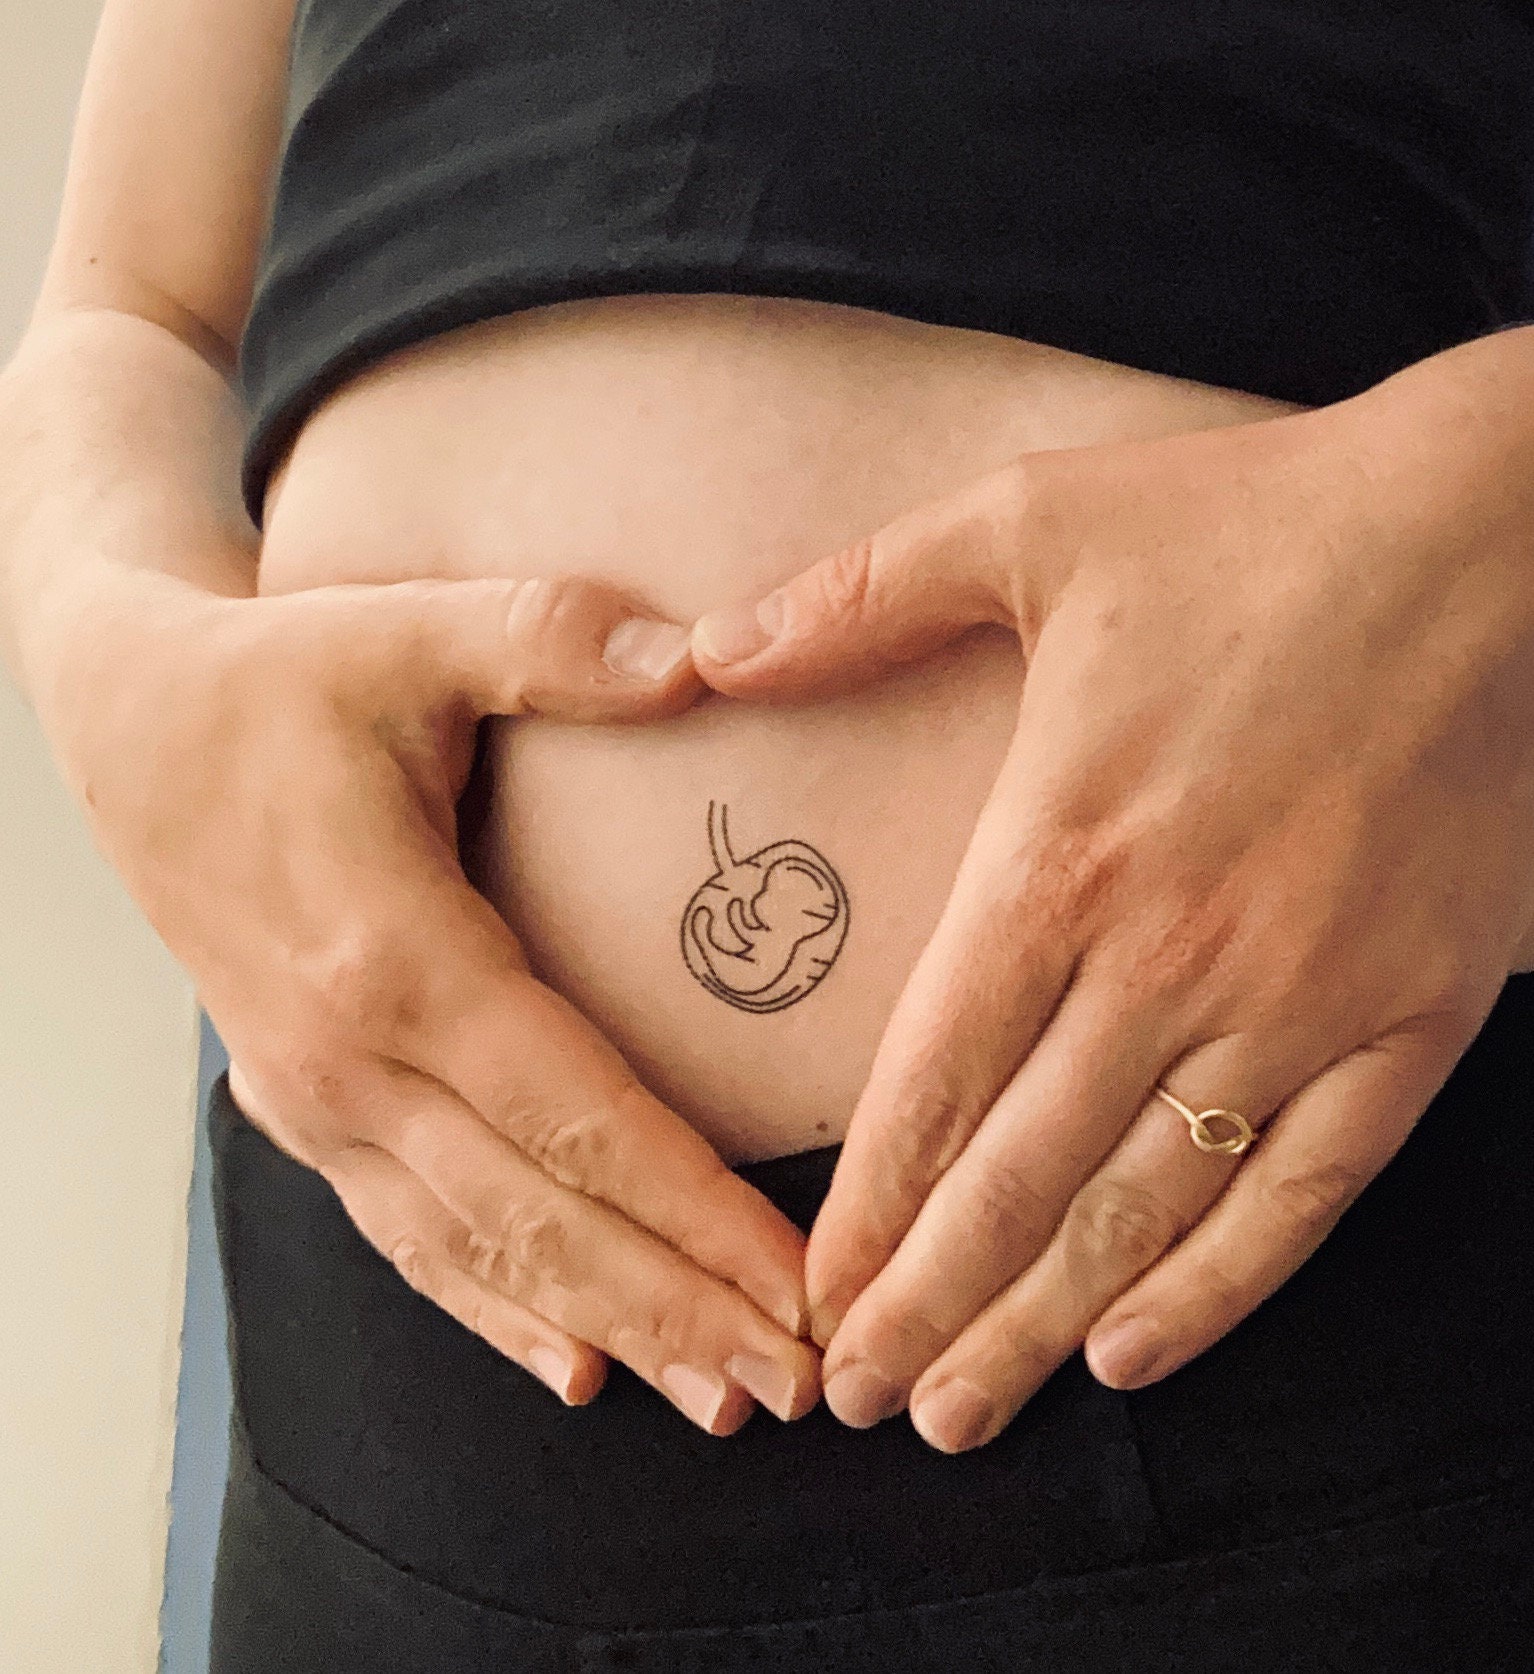 Tattoo Removal While Pregnant What to Consider  Inside Out